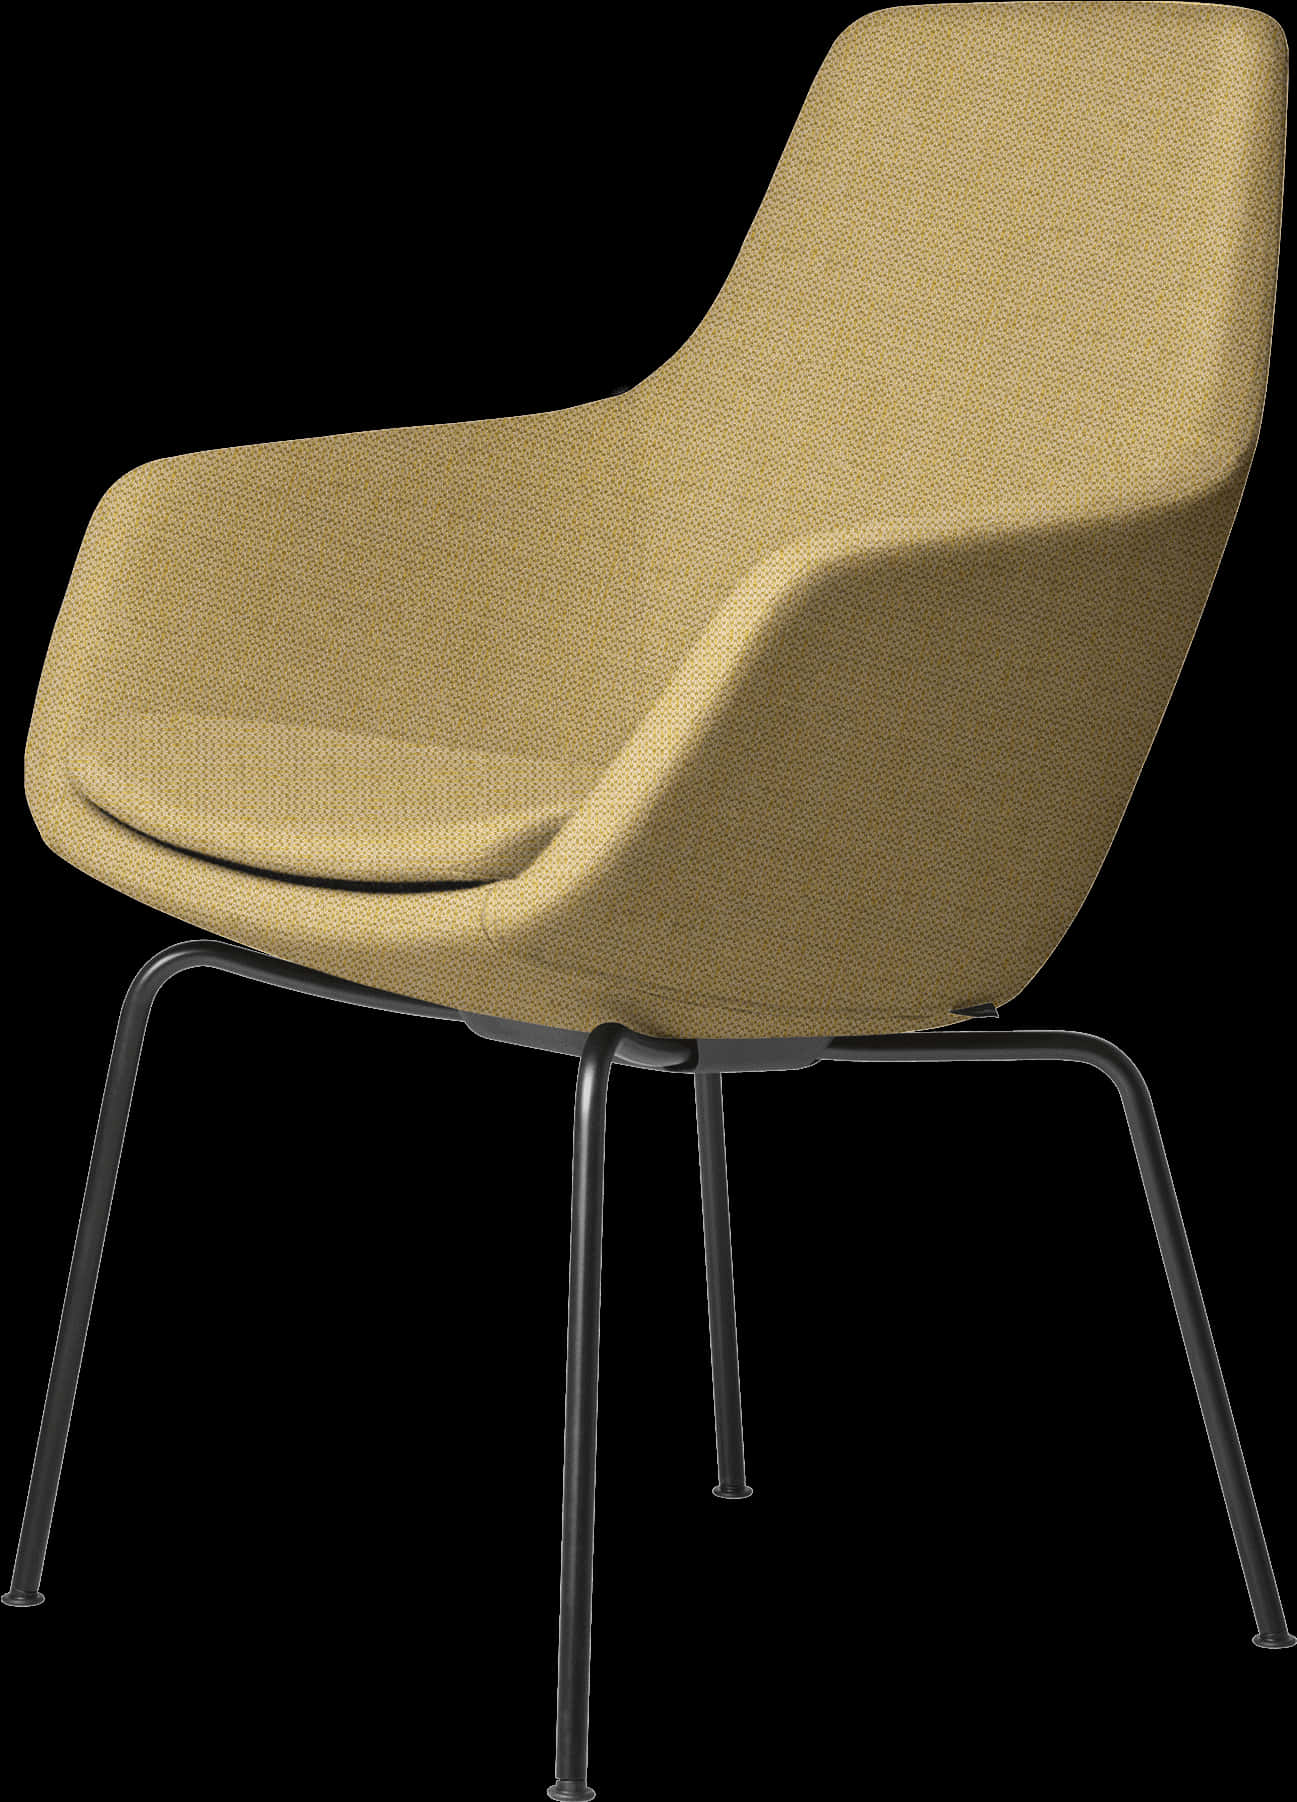 A Yellow Chair With Black Legs